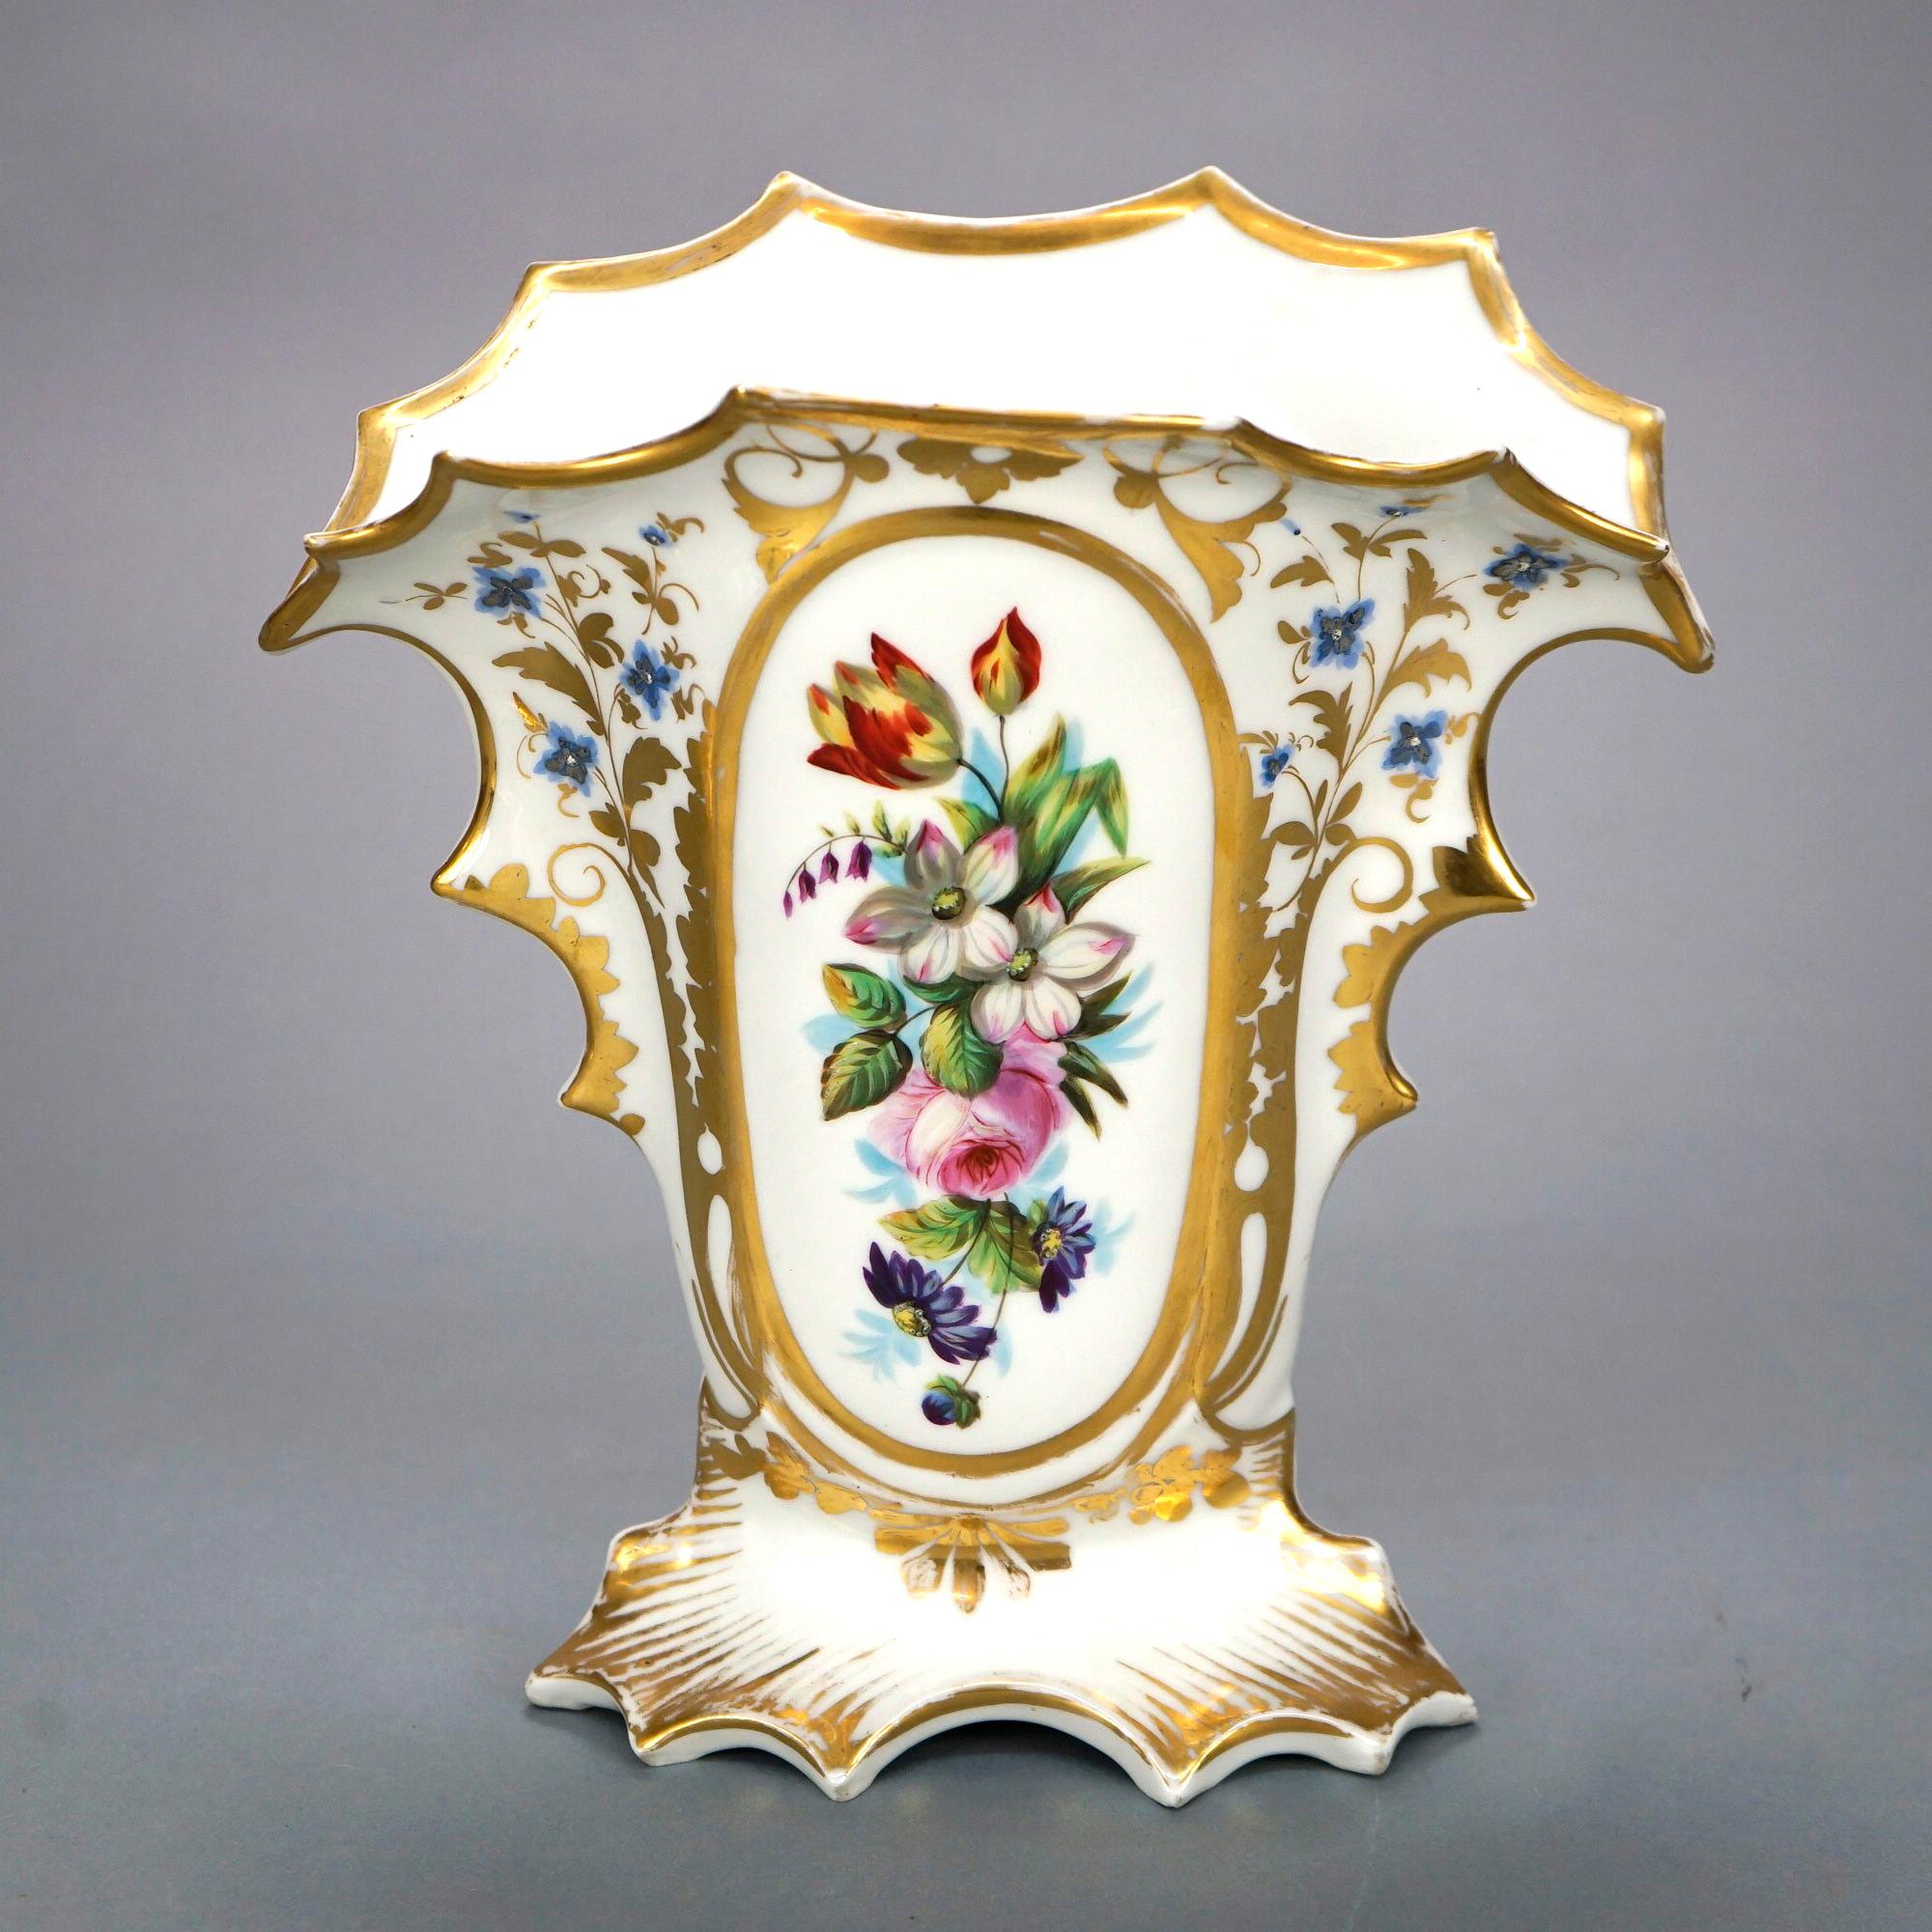 An antique pair of French Old Paris vases offer porcelain footed construction with scalloped rim, hand-painted floral decoration, and gilt highlights throughout, 19th century

Measures- 11'' H x 10.5'' W x 6'' D.